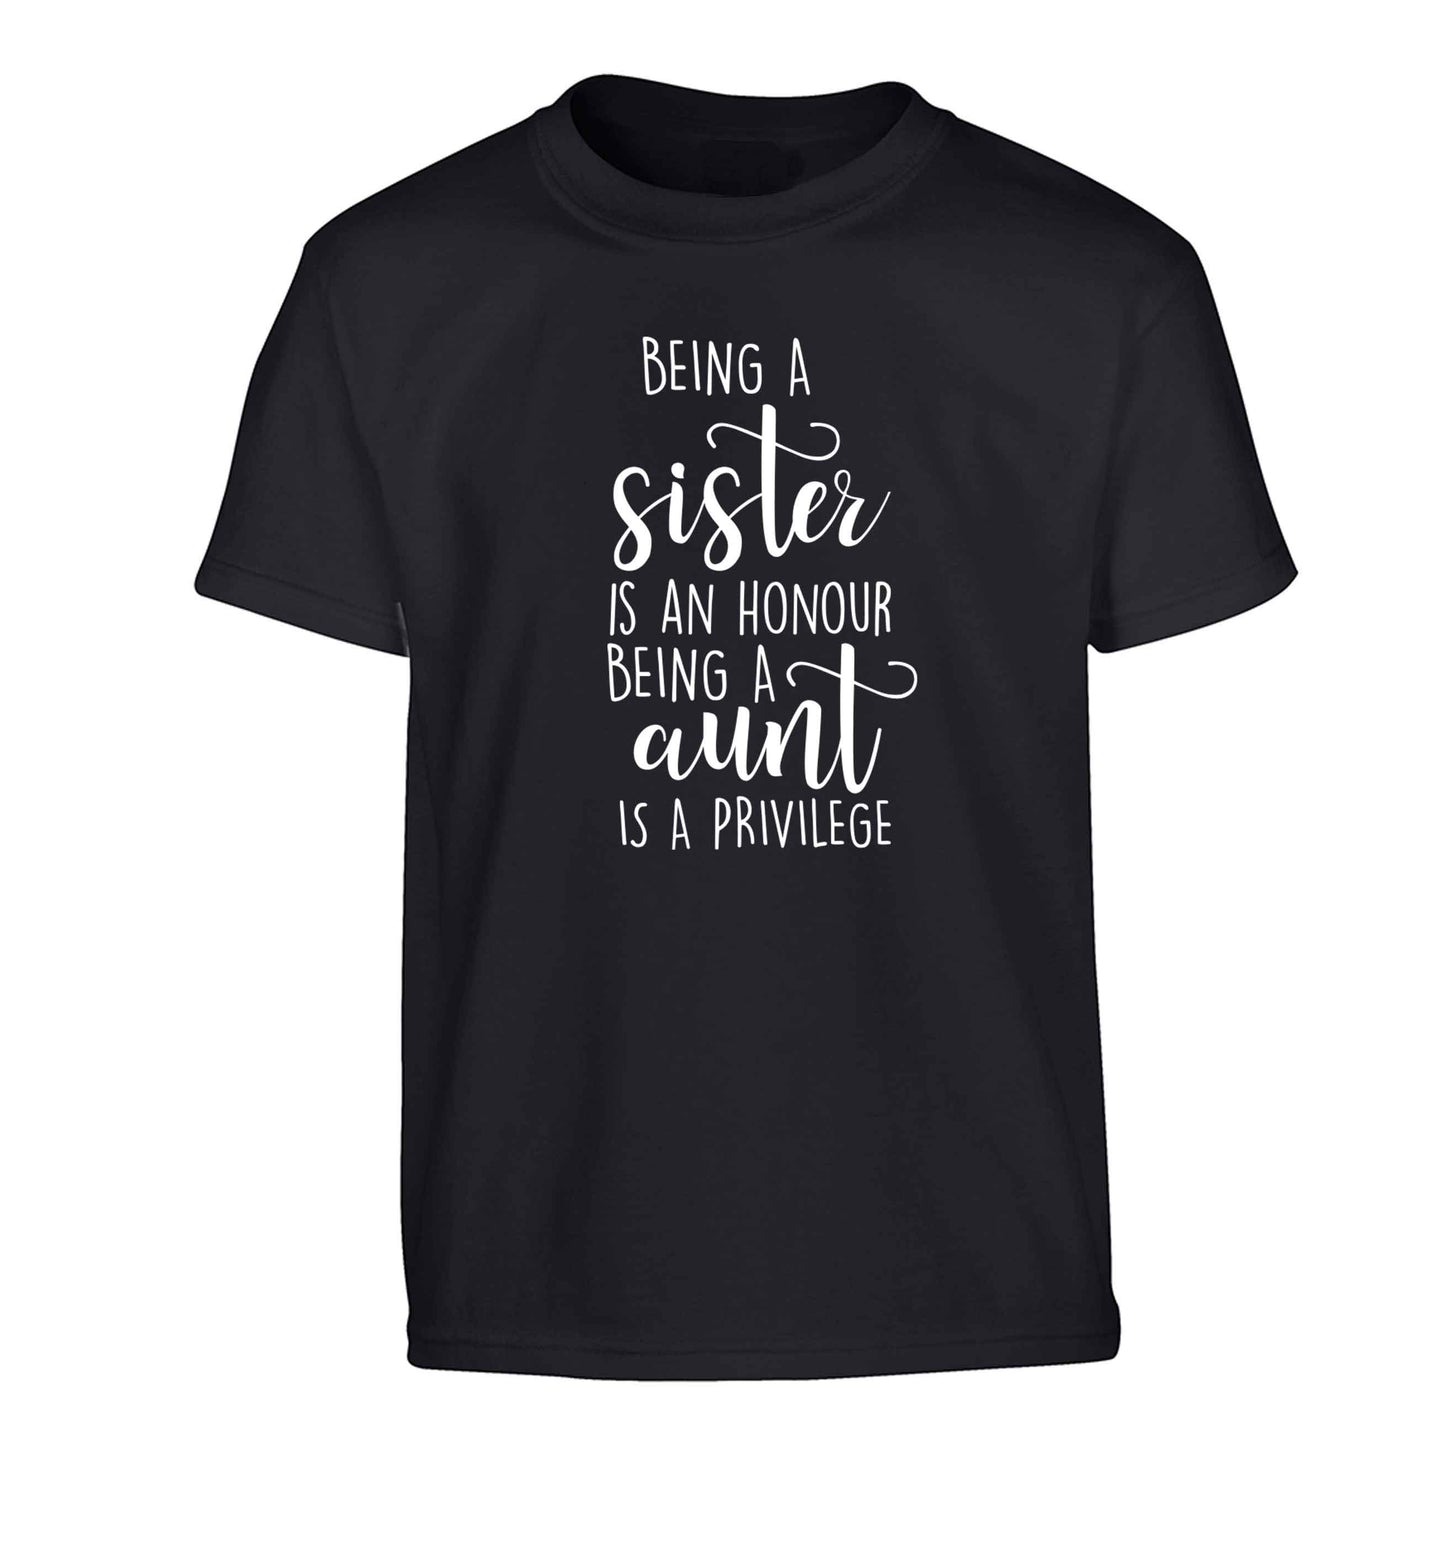 Being a sister is an honour being an auntie is a privilege Children's black Tshirt 12-13 Years